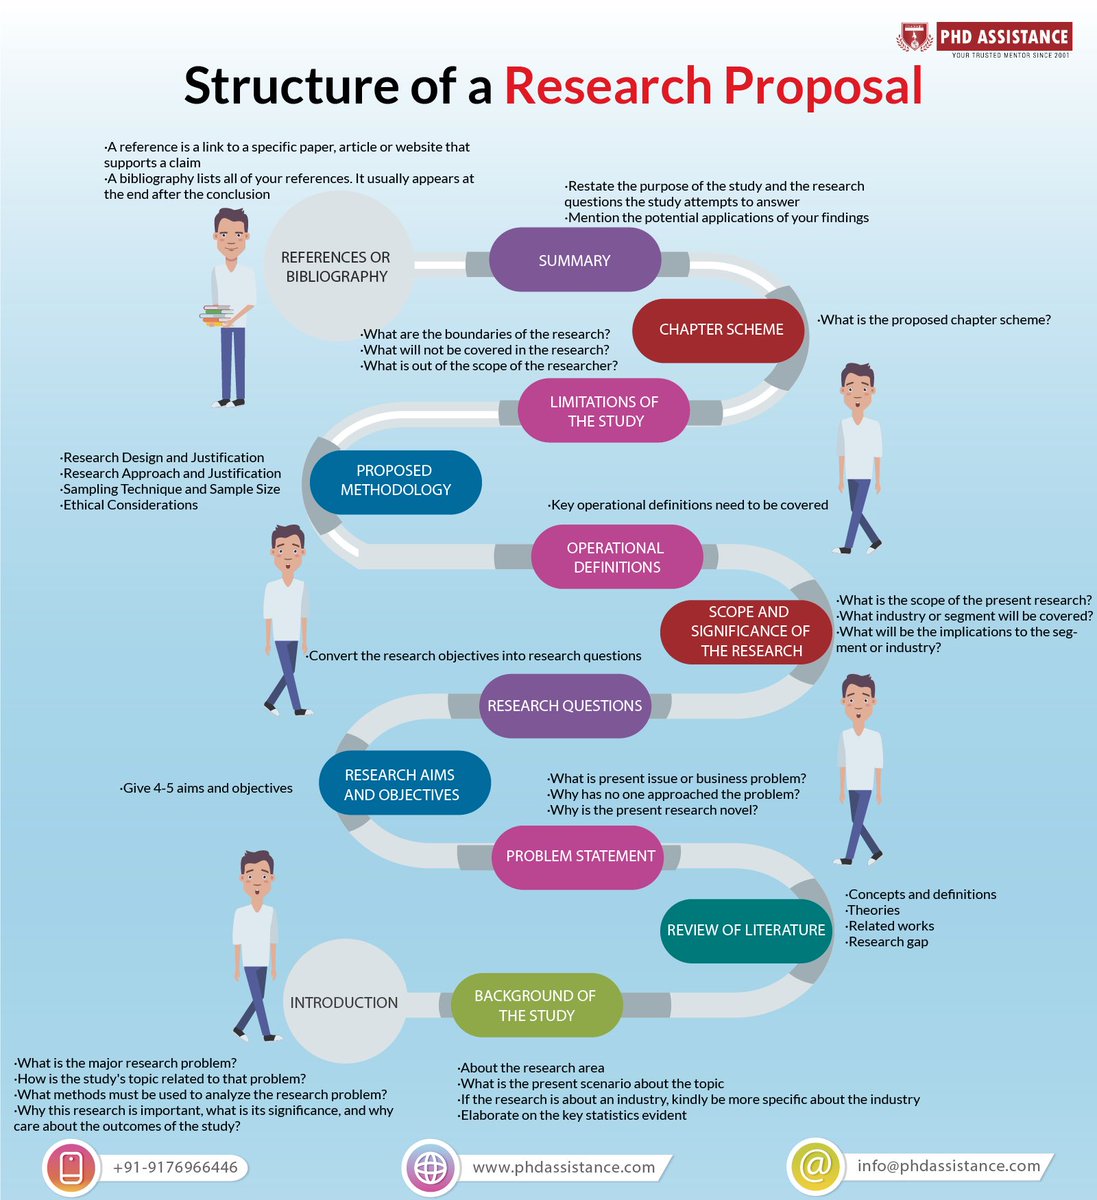 Structure of a Research proposal #PhD #PhDlife #academics #AcademicChatter #AcademicTwitter #Postdocs